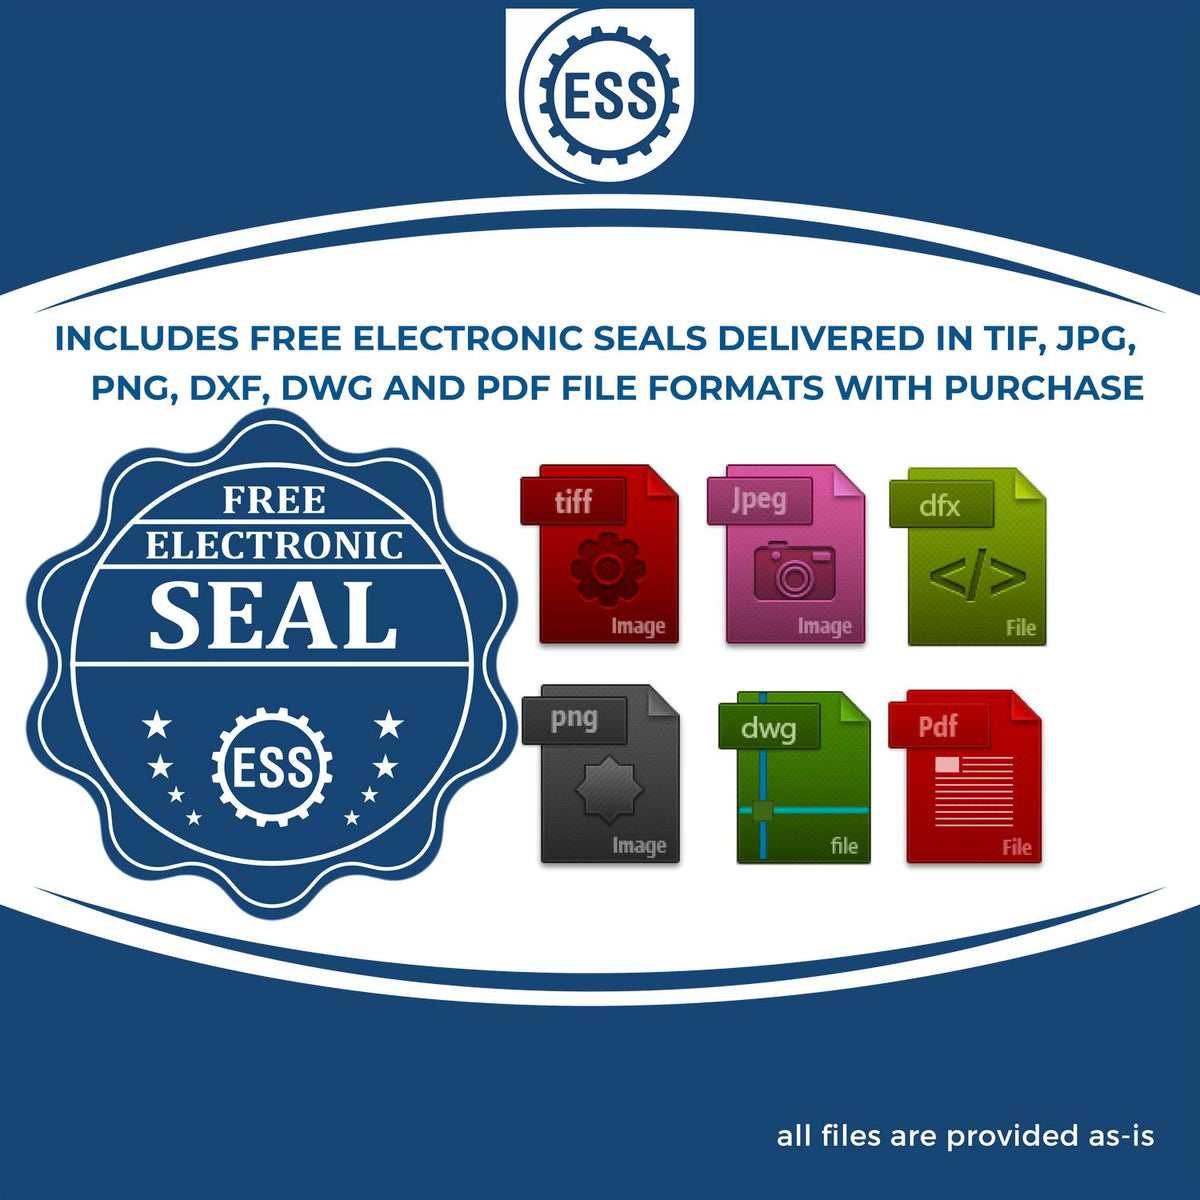 An infographic for the free electronic seal for the Gift Arkansas Landscape Architect Seal illustrating the different file type icons such as DXF, DWG, TIF, JPG and PNG.